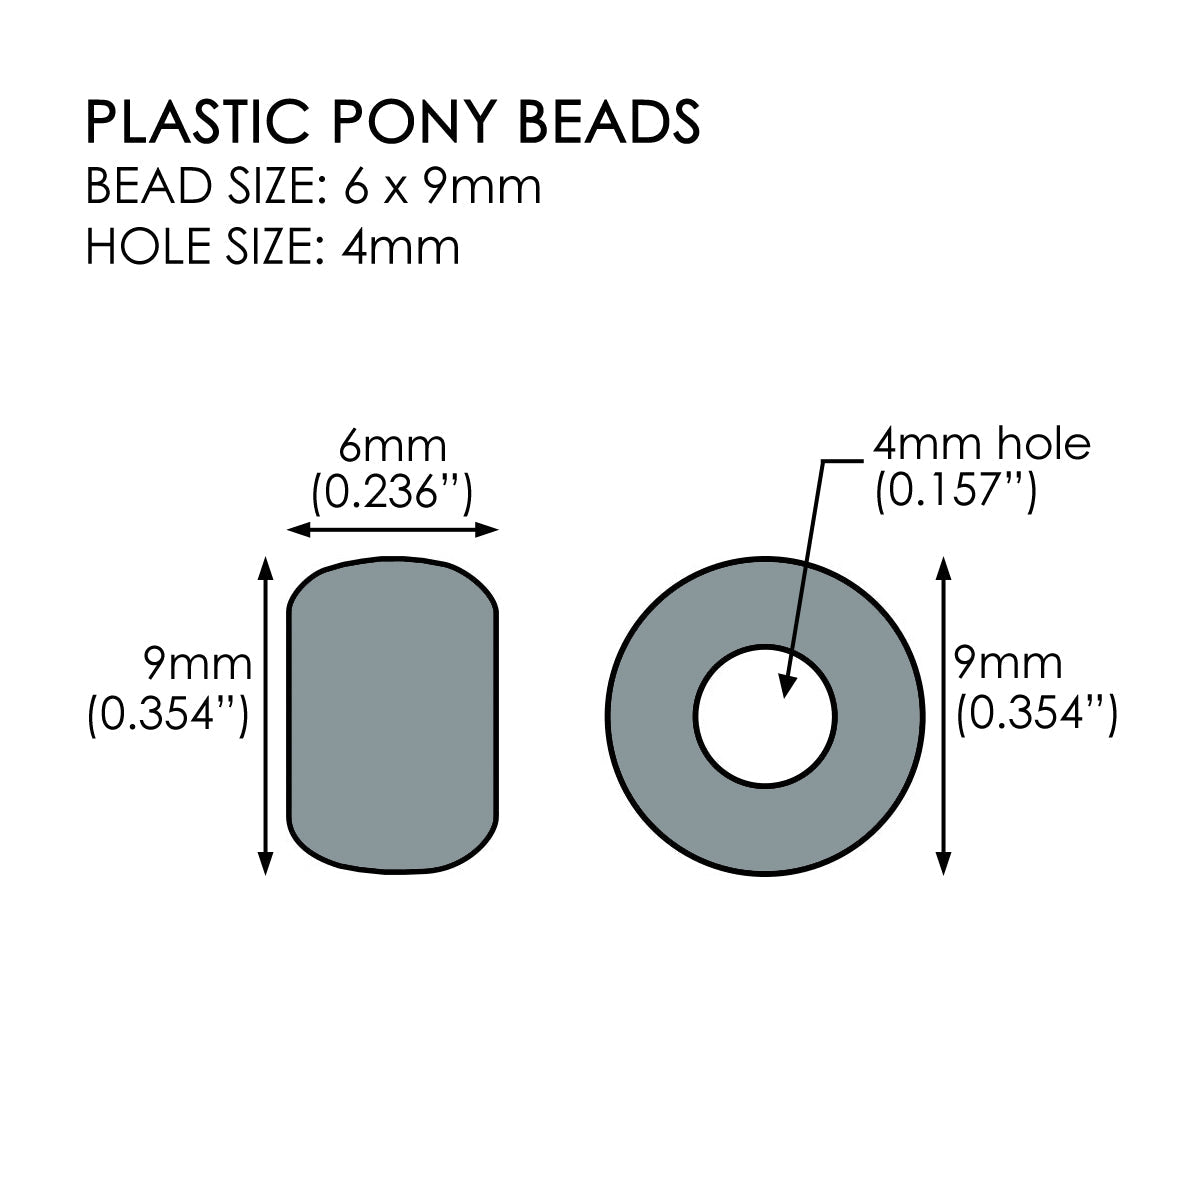 Diagram of a pony bead with dimensions.